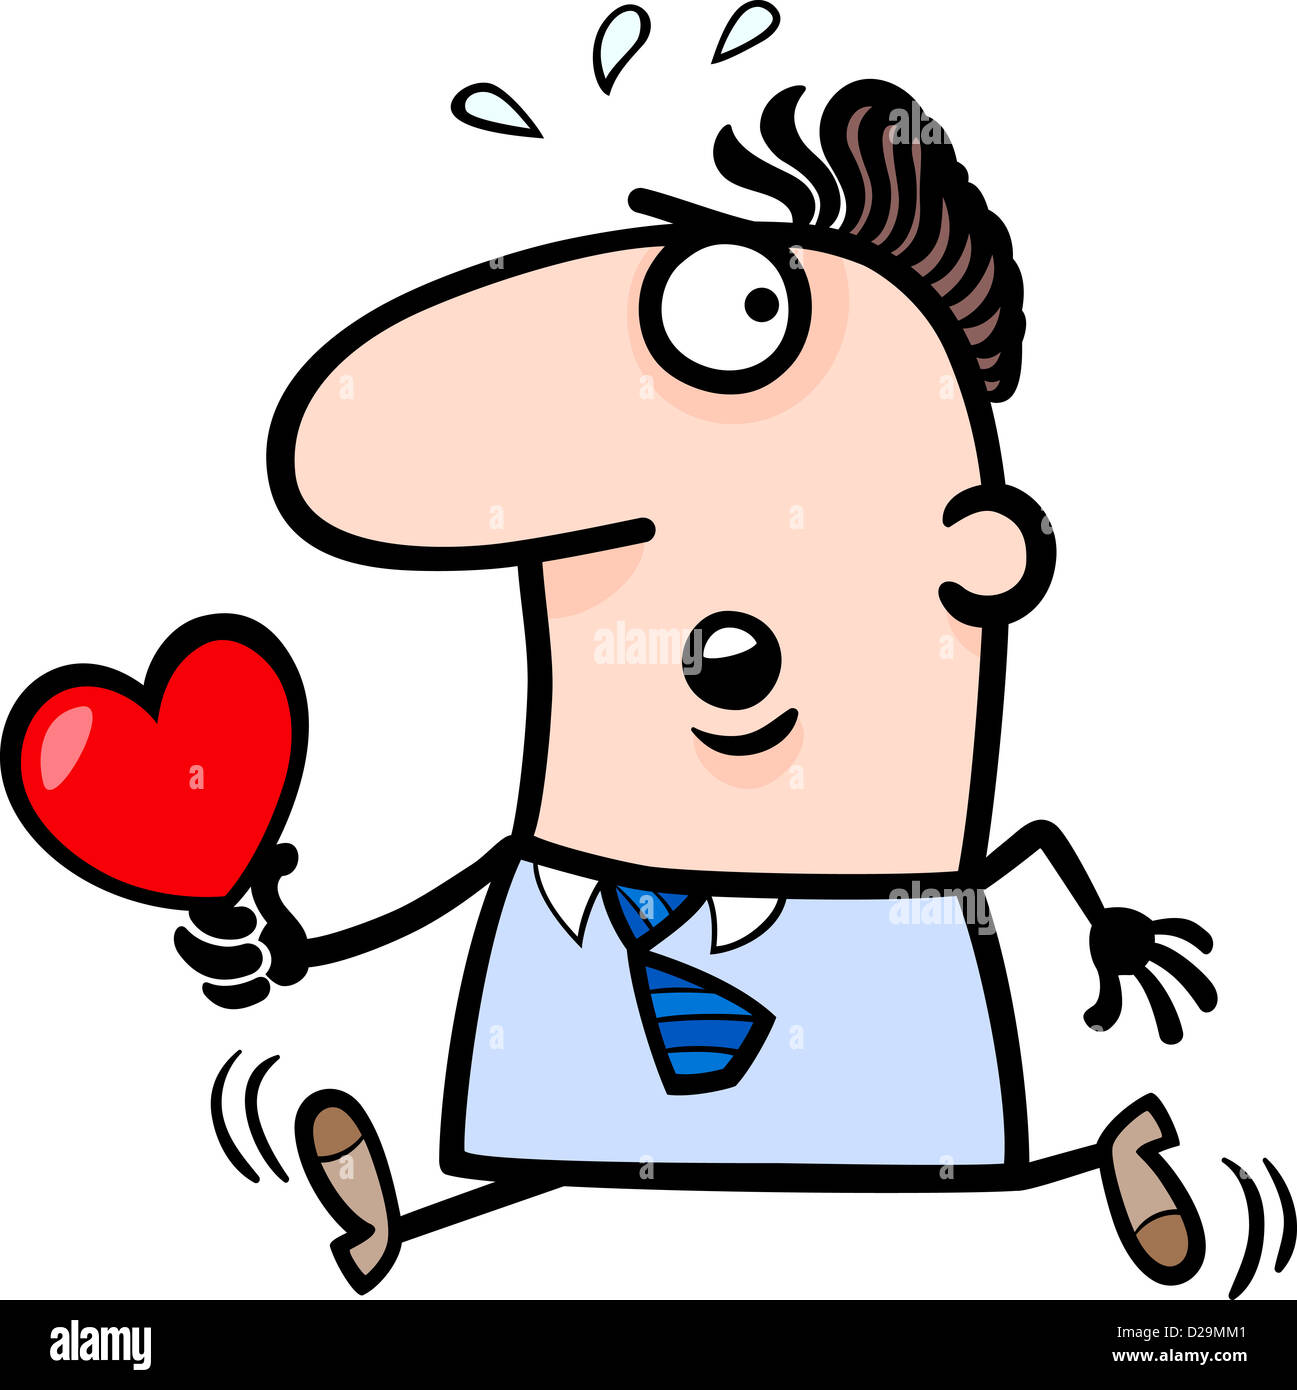 Cartoon St Valentines Illustration of Late Running Man in Love with Heart or Valentine Card Stock Photo